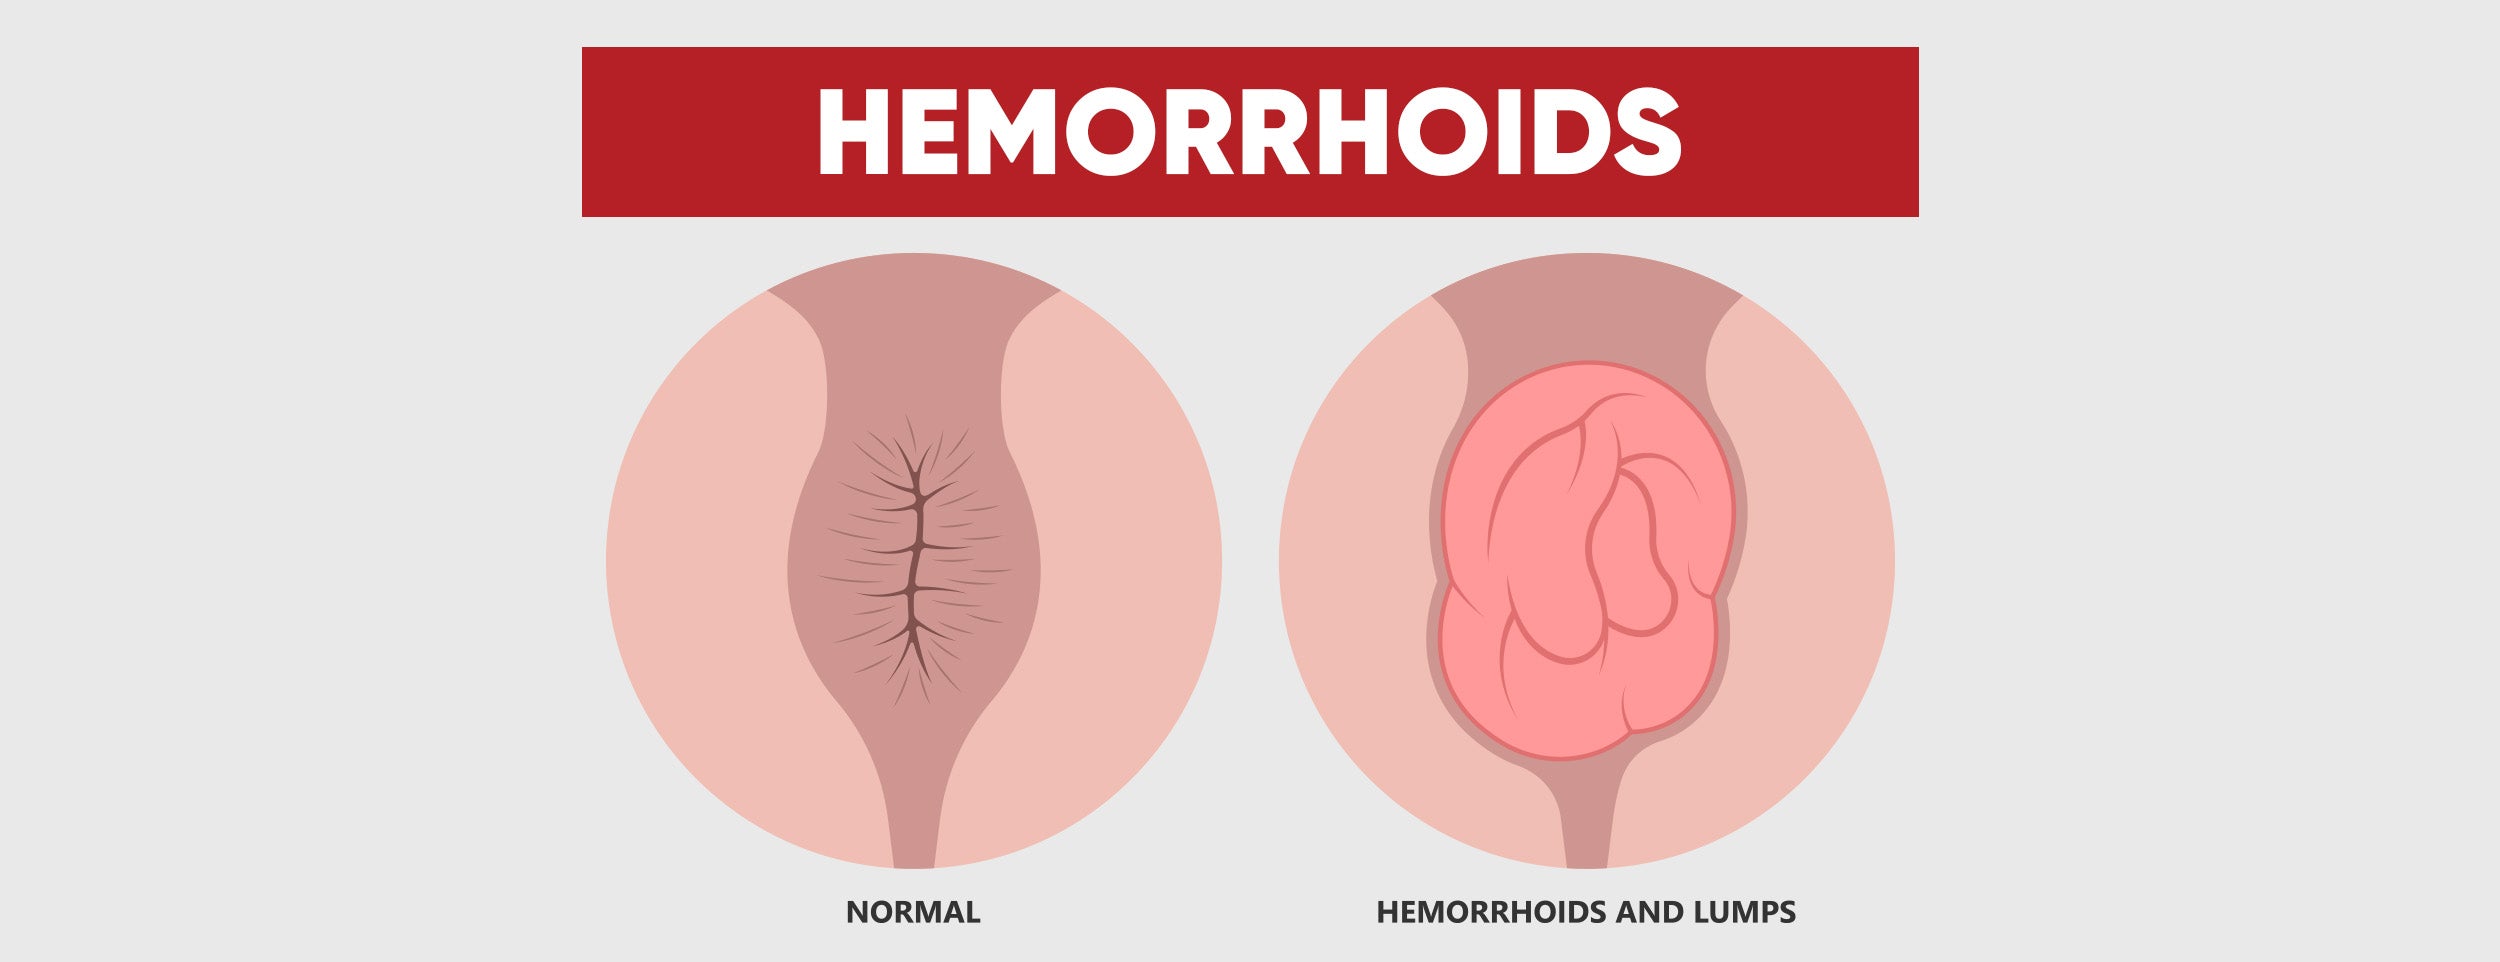 An External hemorrhoid infected with a hole